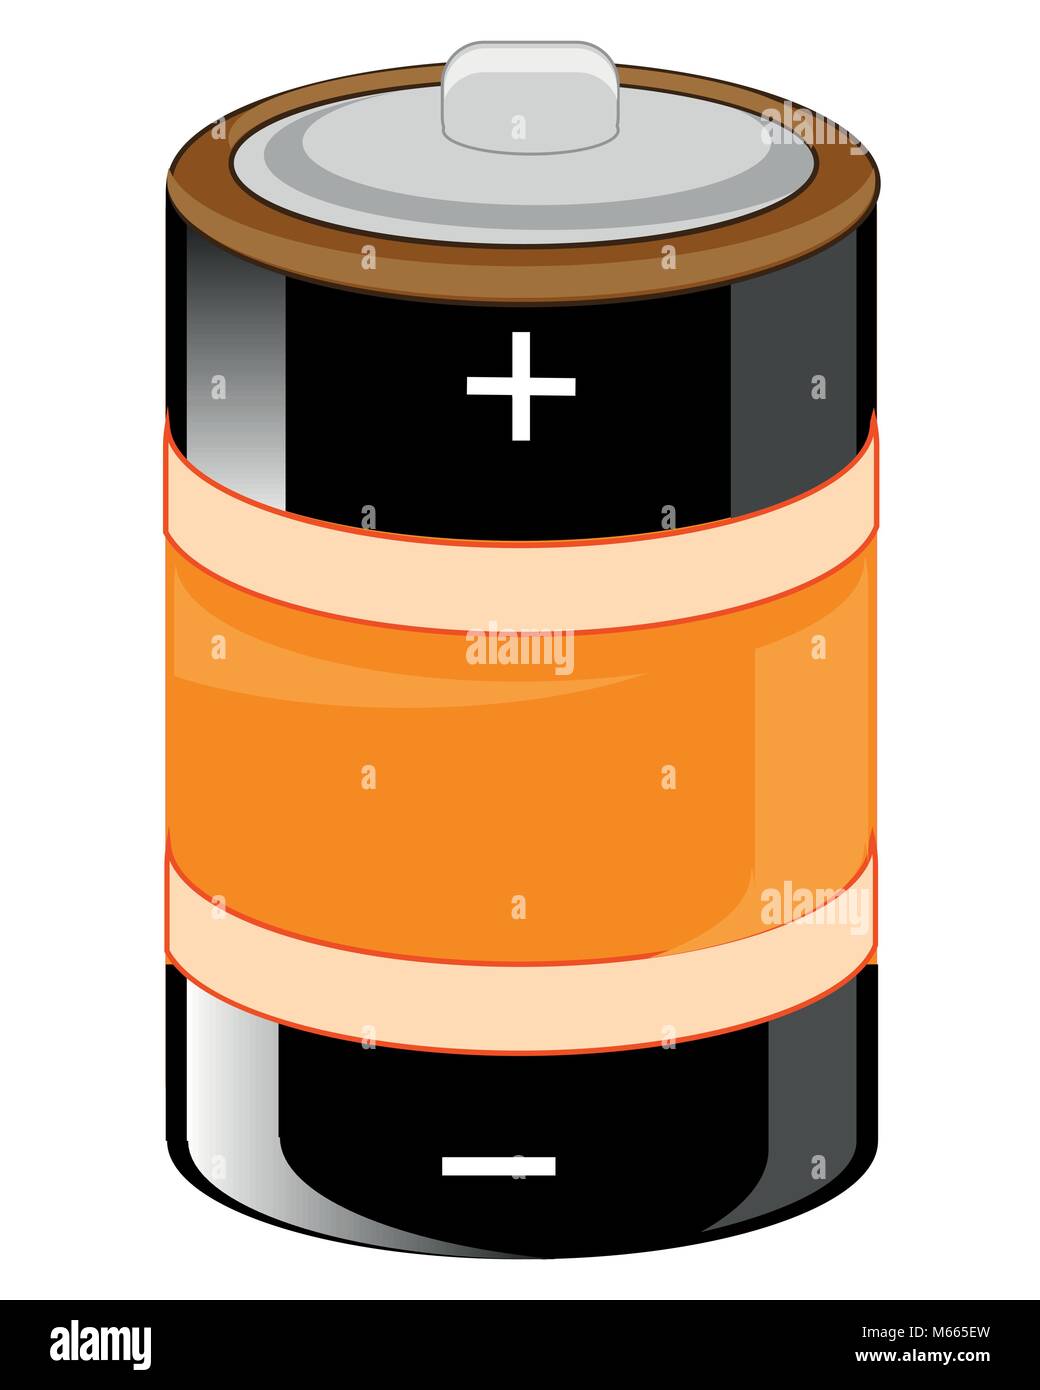 Alkaline battery of the round form Stock Vector